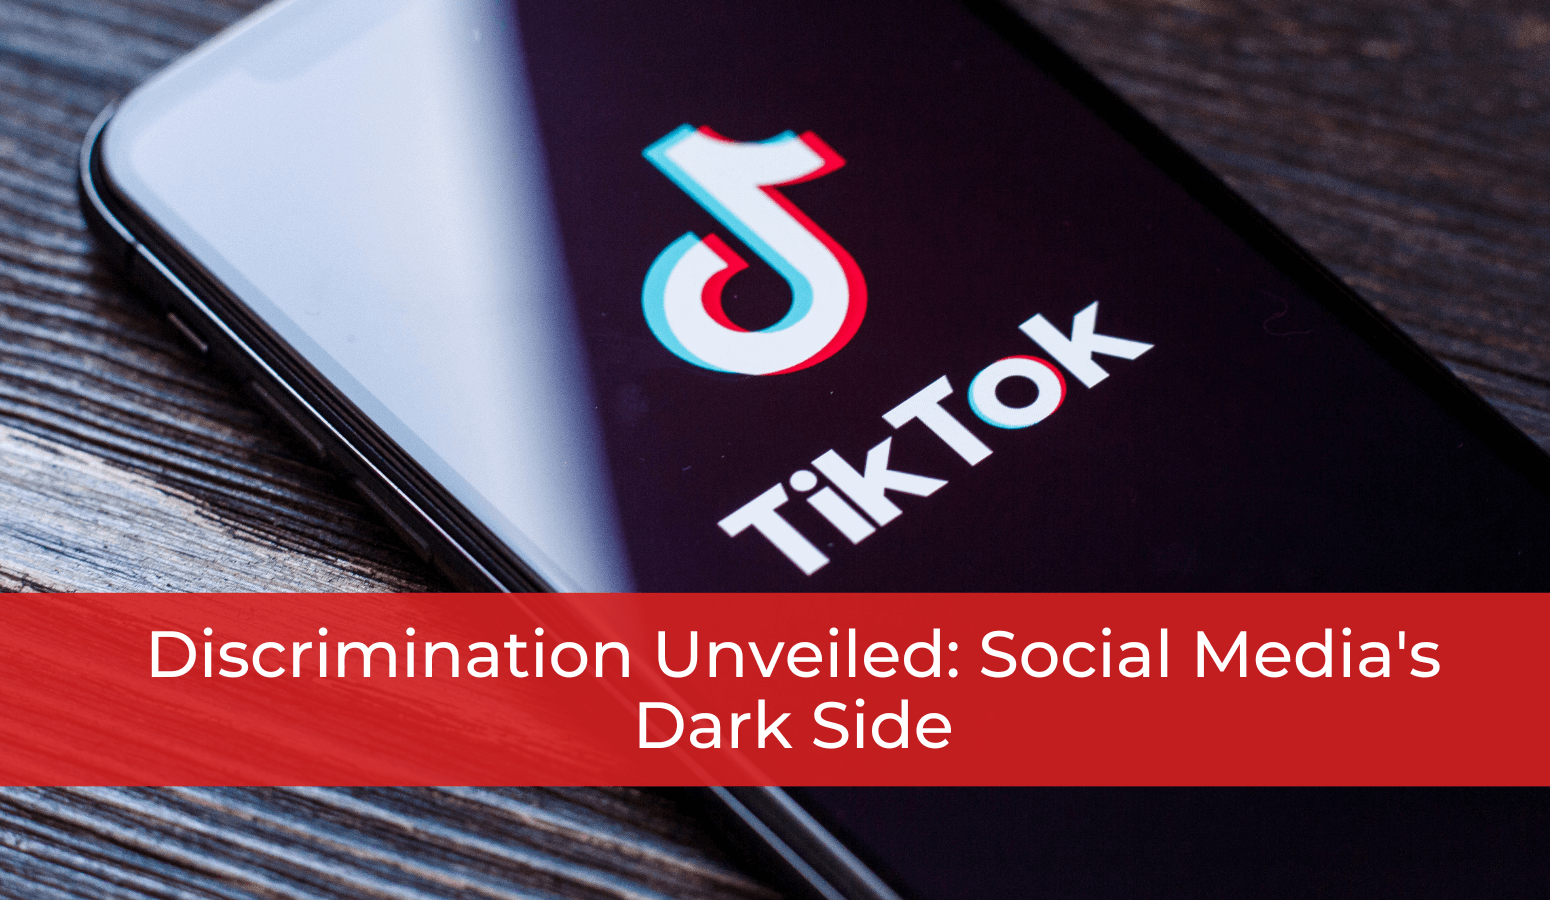 Featured image for “Discrimination Unveiled: Social Media’s Dark Side”